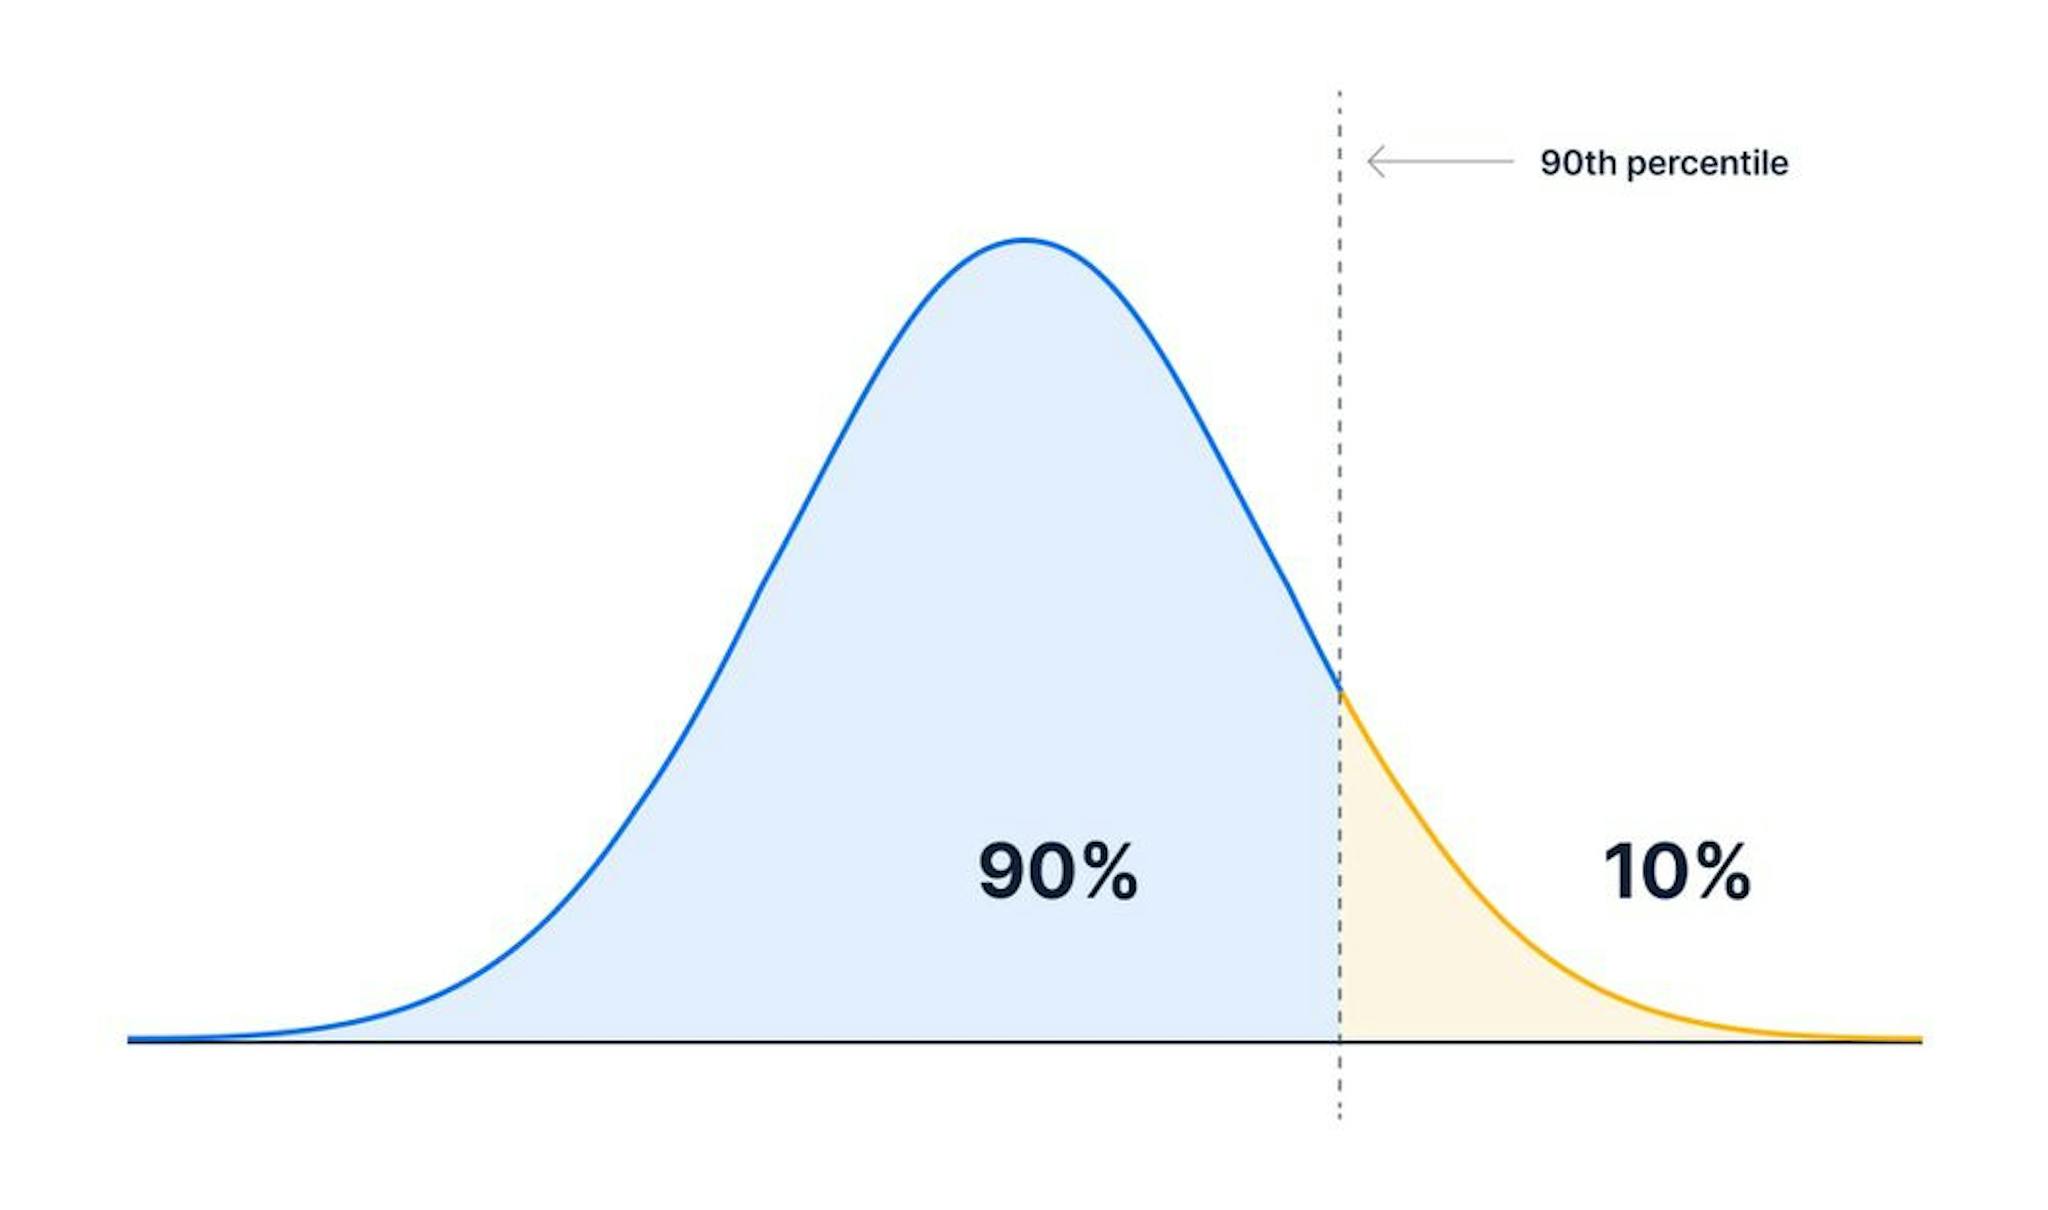 A normal distribution with the 90th percentile depicted. 